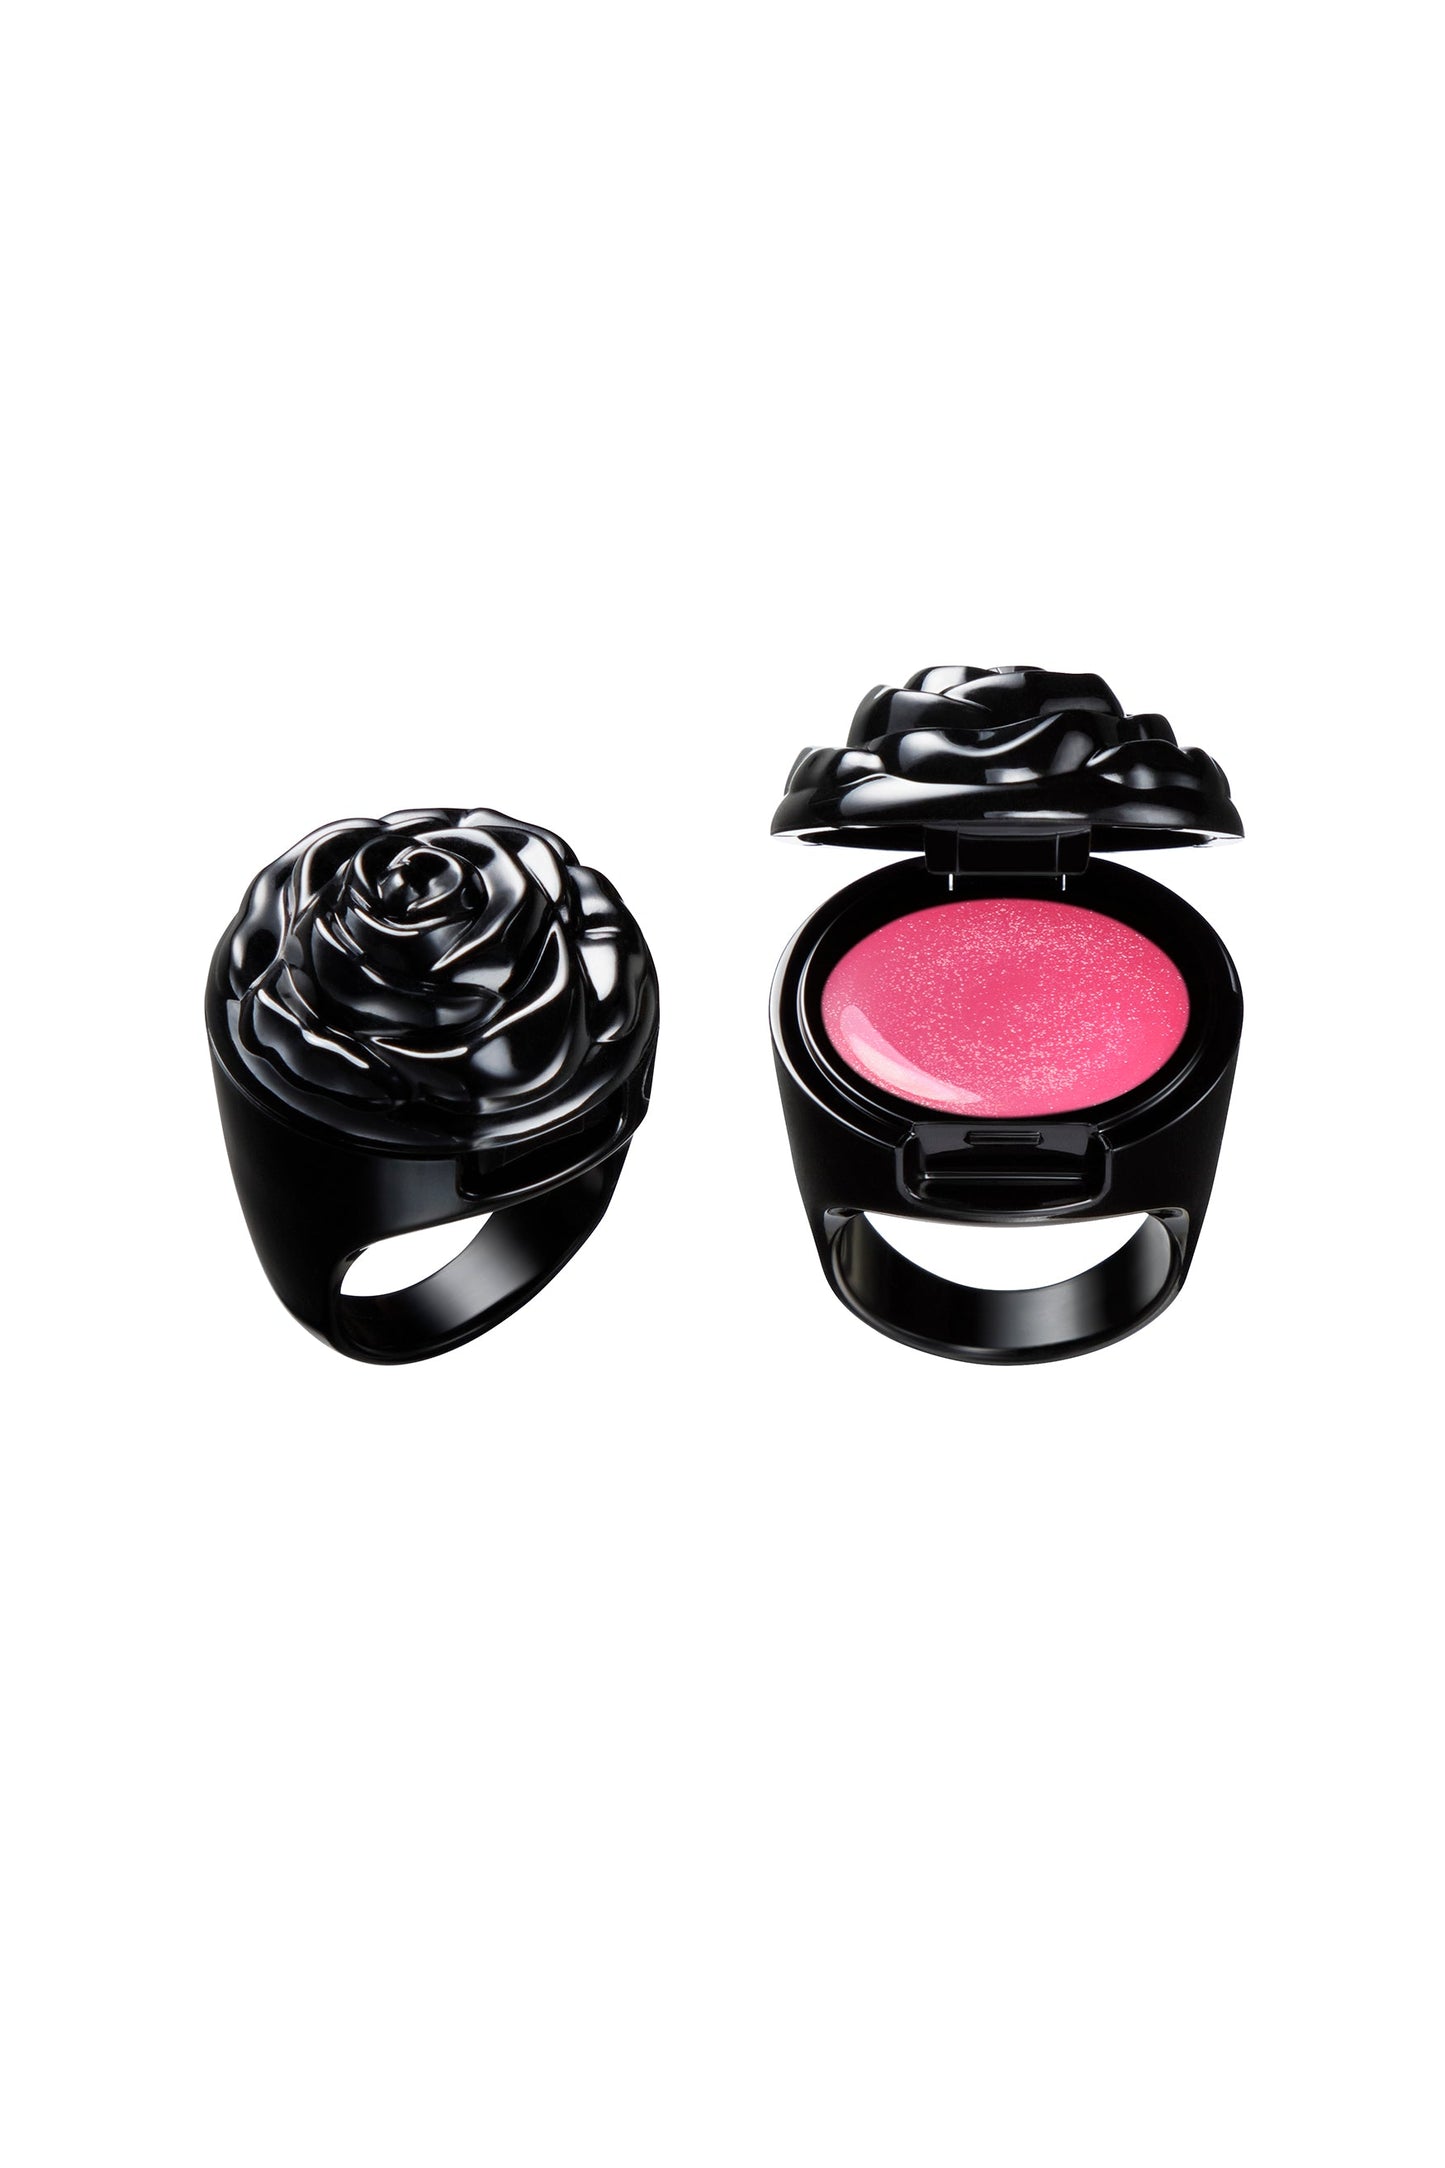 CHARMING PINK in a black ring container, black rose as a cap, makeup inside